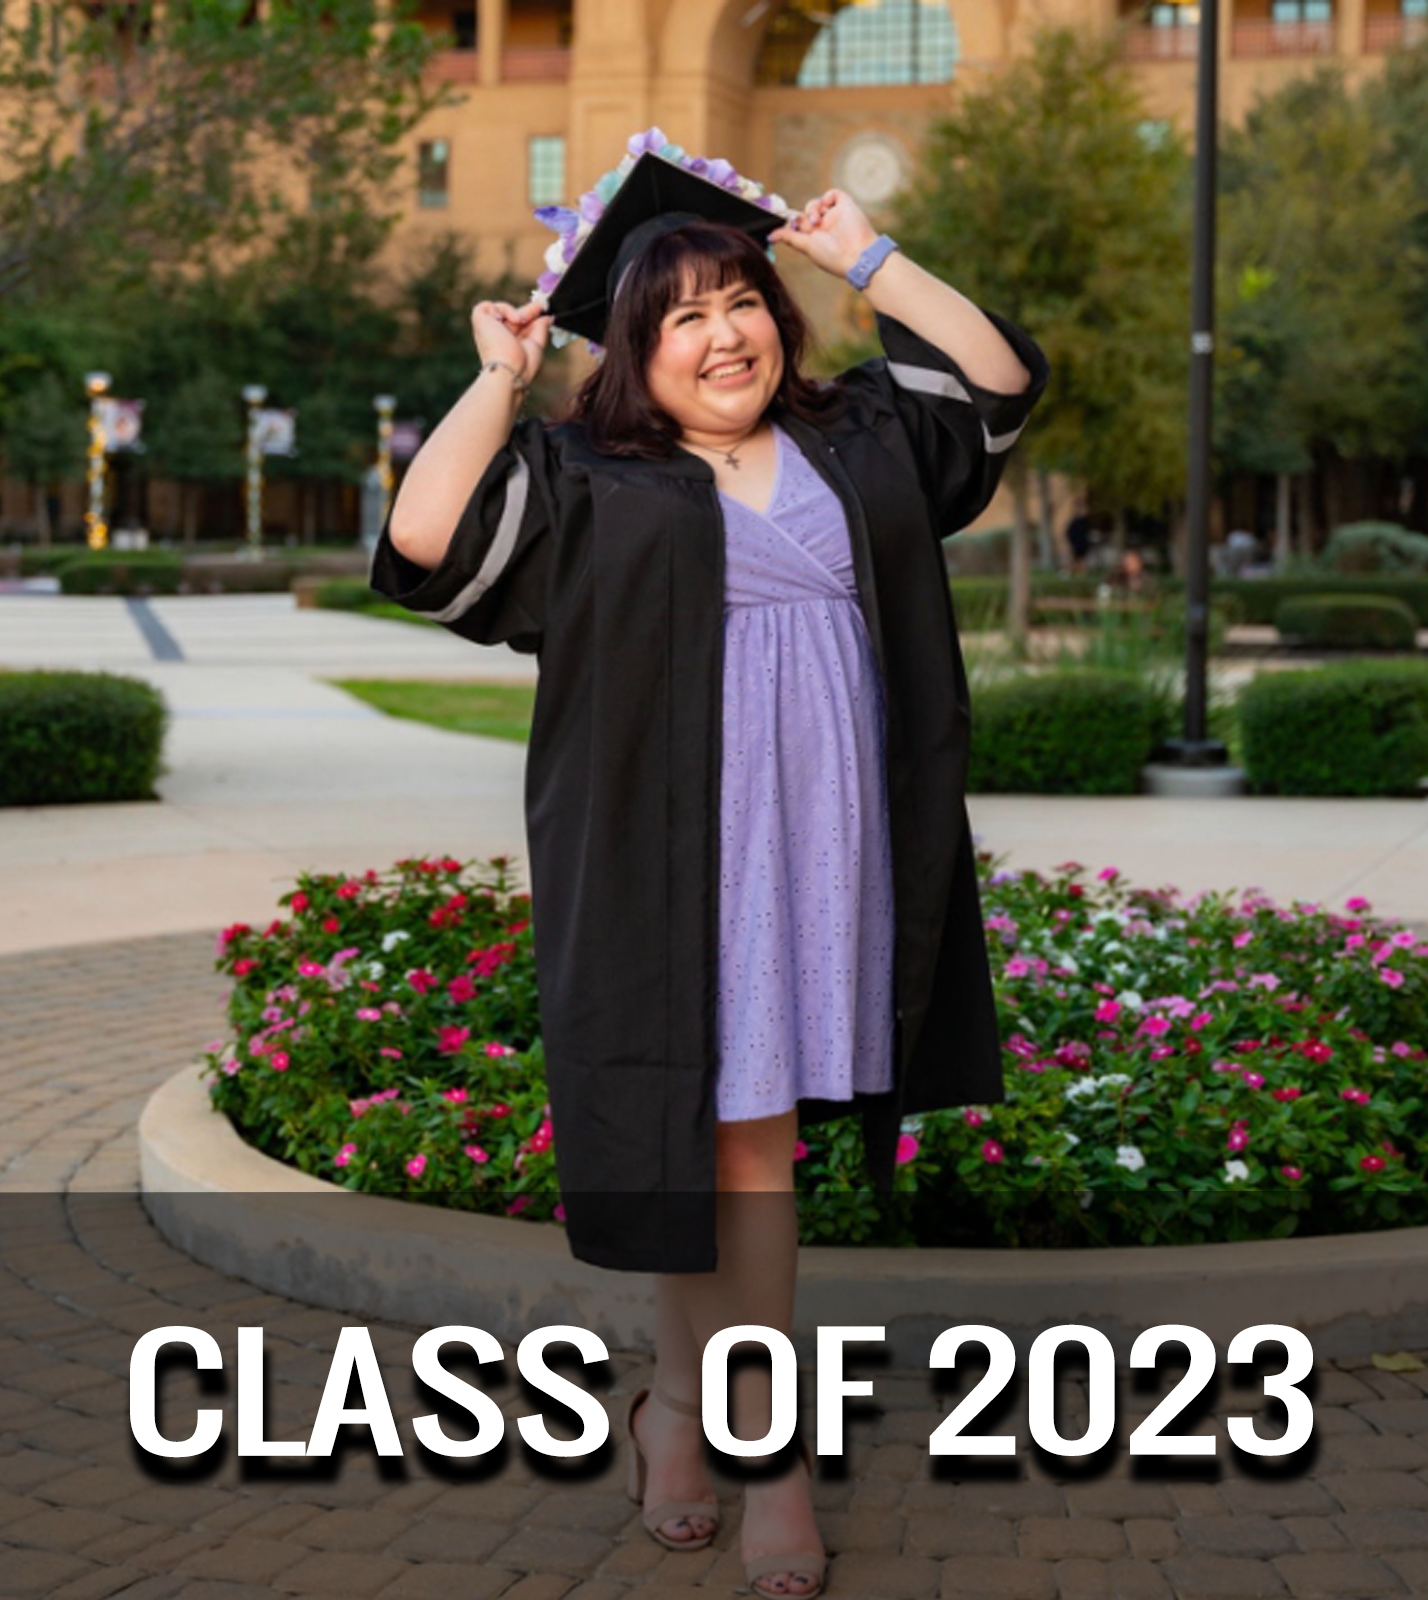 Villegas posing on campus in her cap and gown.